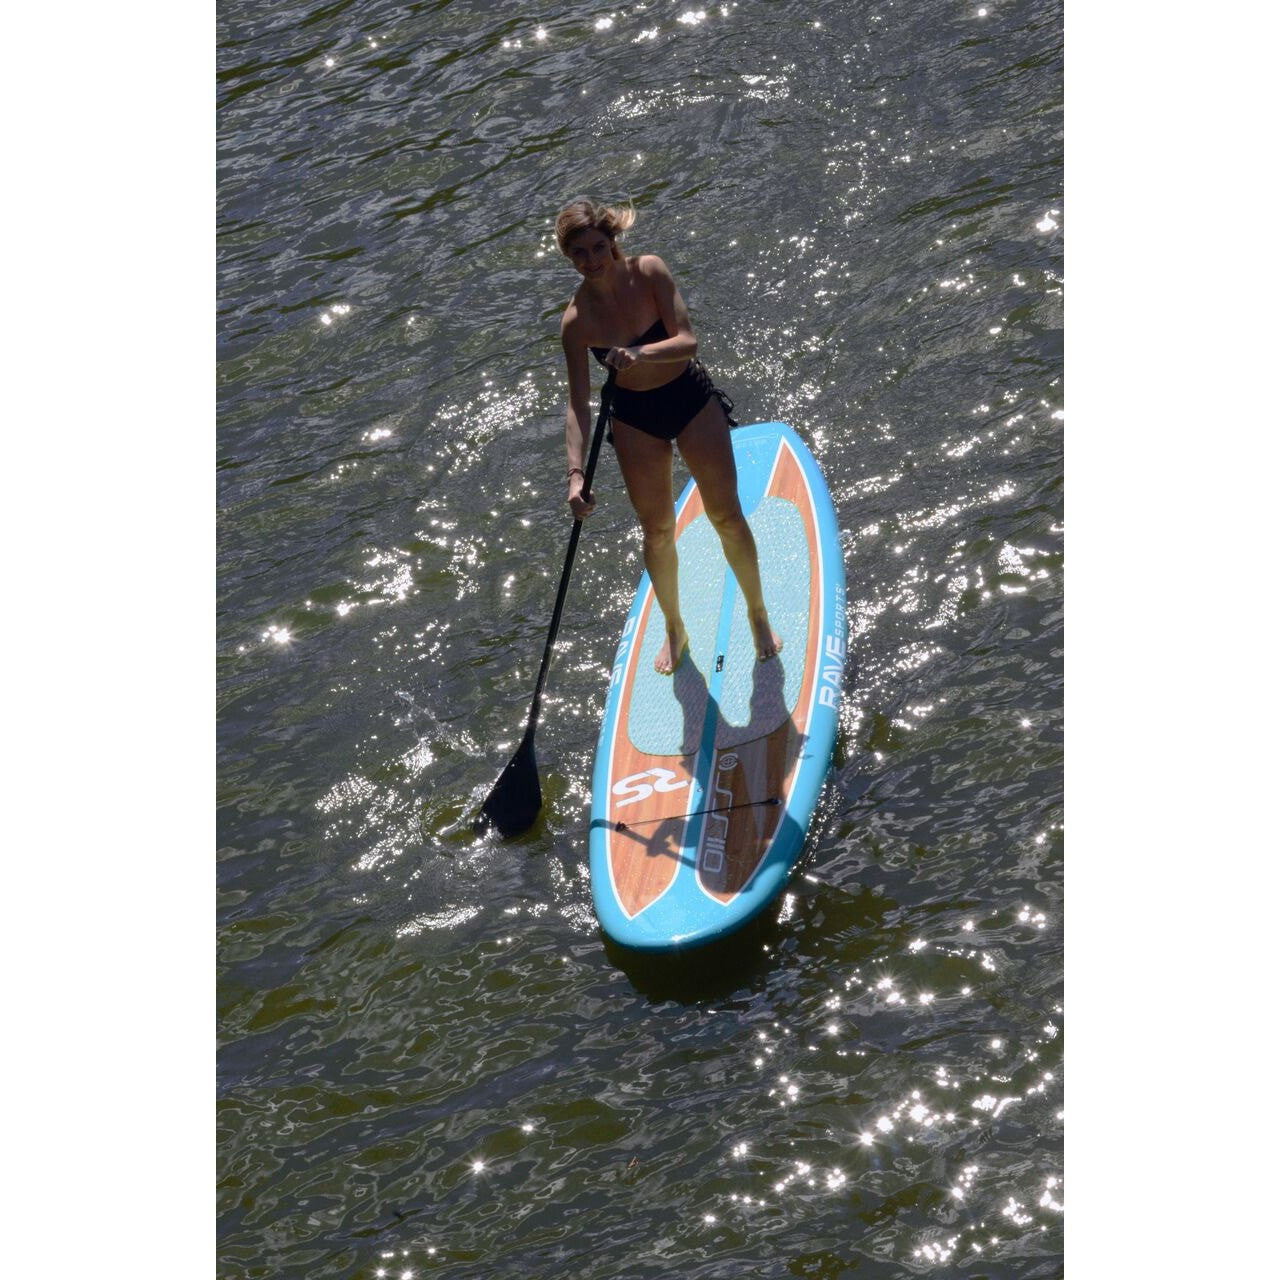 Rave Sports Shoreline Series SS110 Stand Up Paddle Board SUP - 02728 -  Kayak Creek | Stand-up Paddleboards